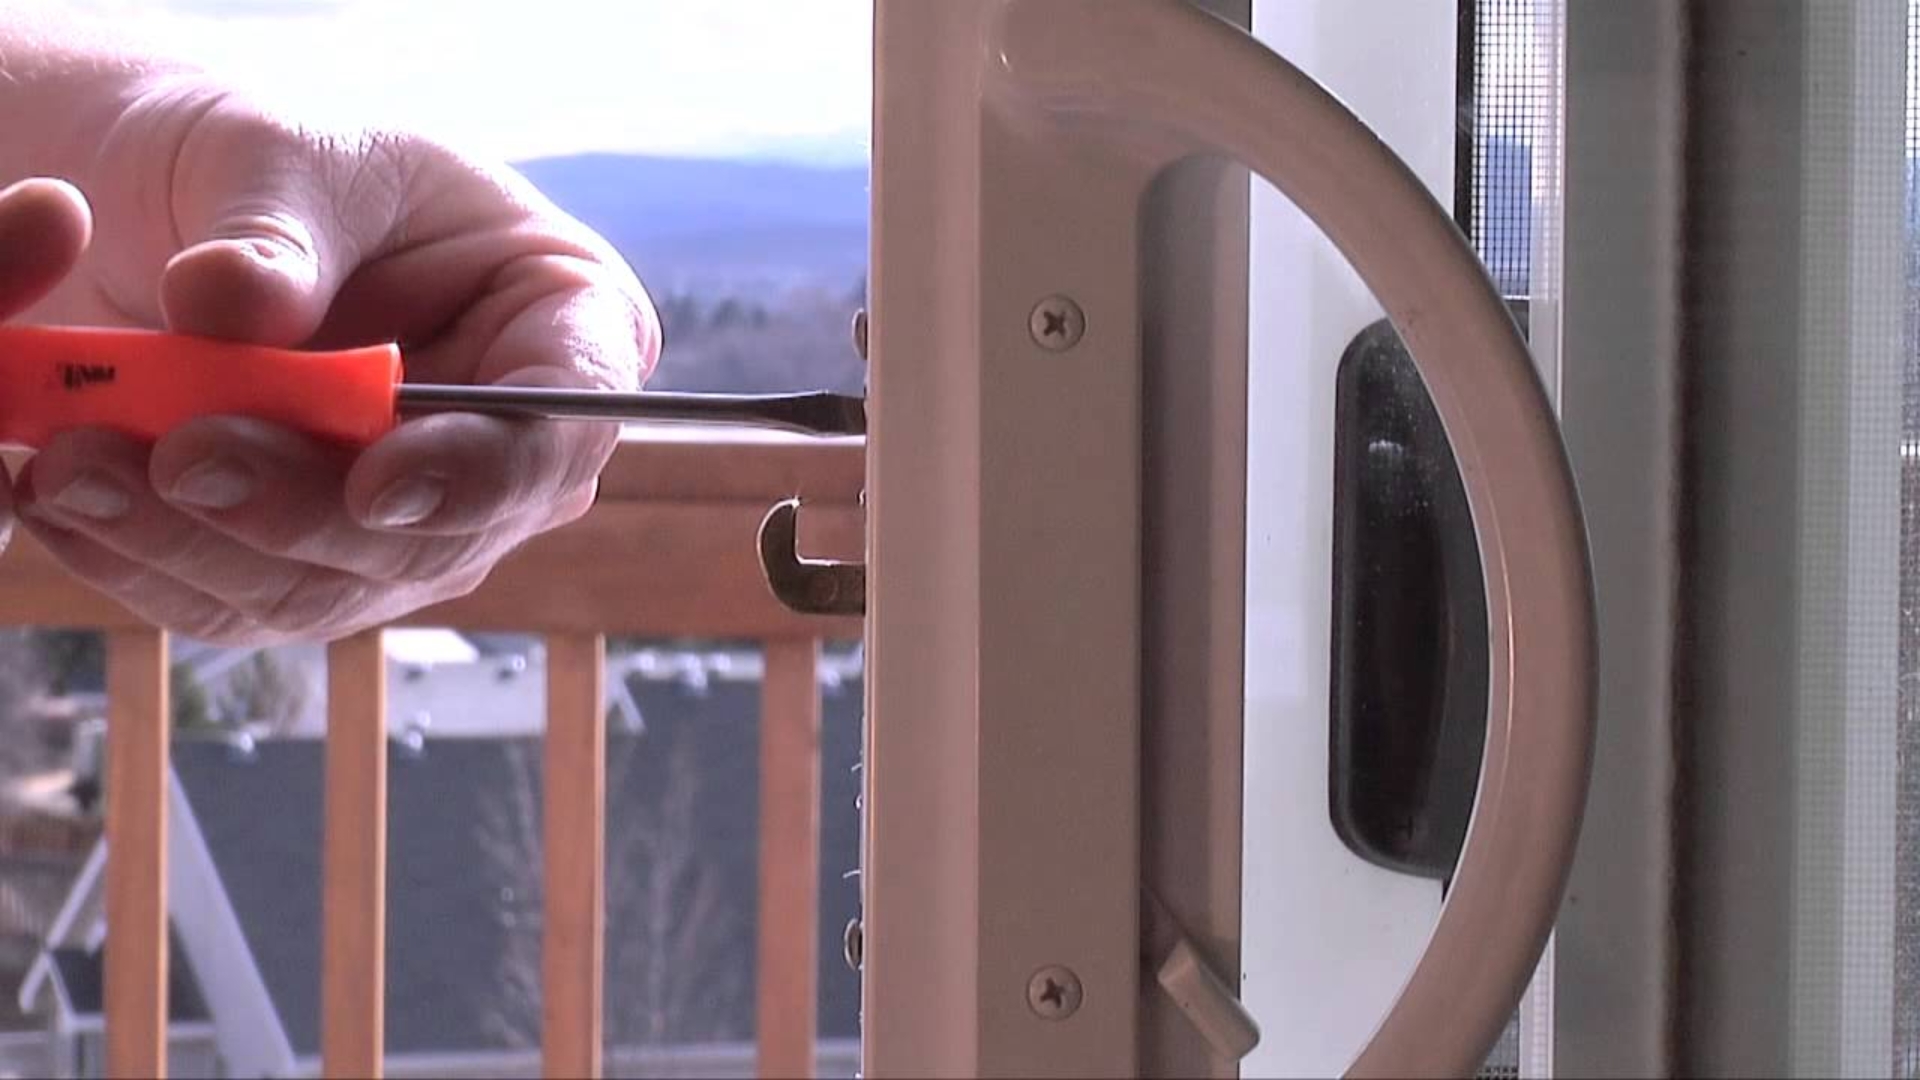 A locksmith maintaining locks to prevent the need for broken key extraction